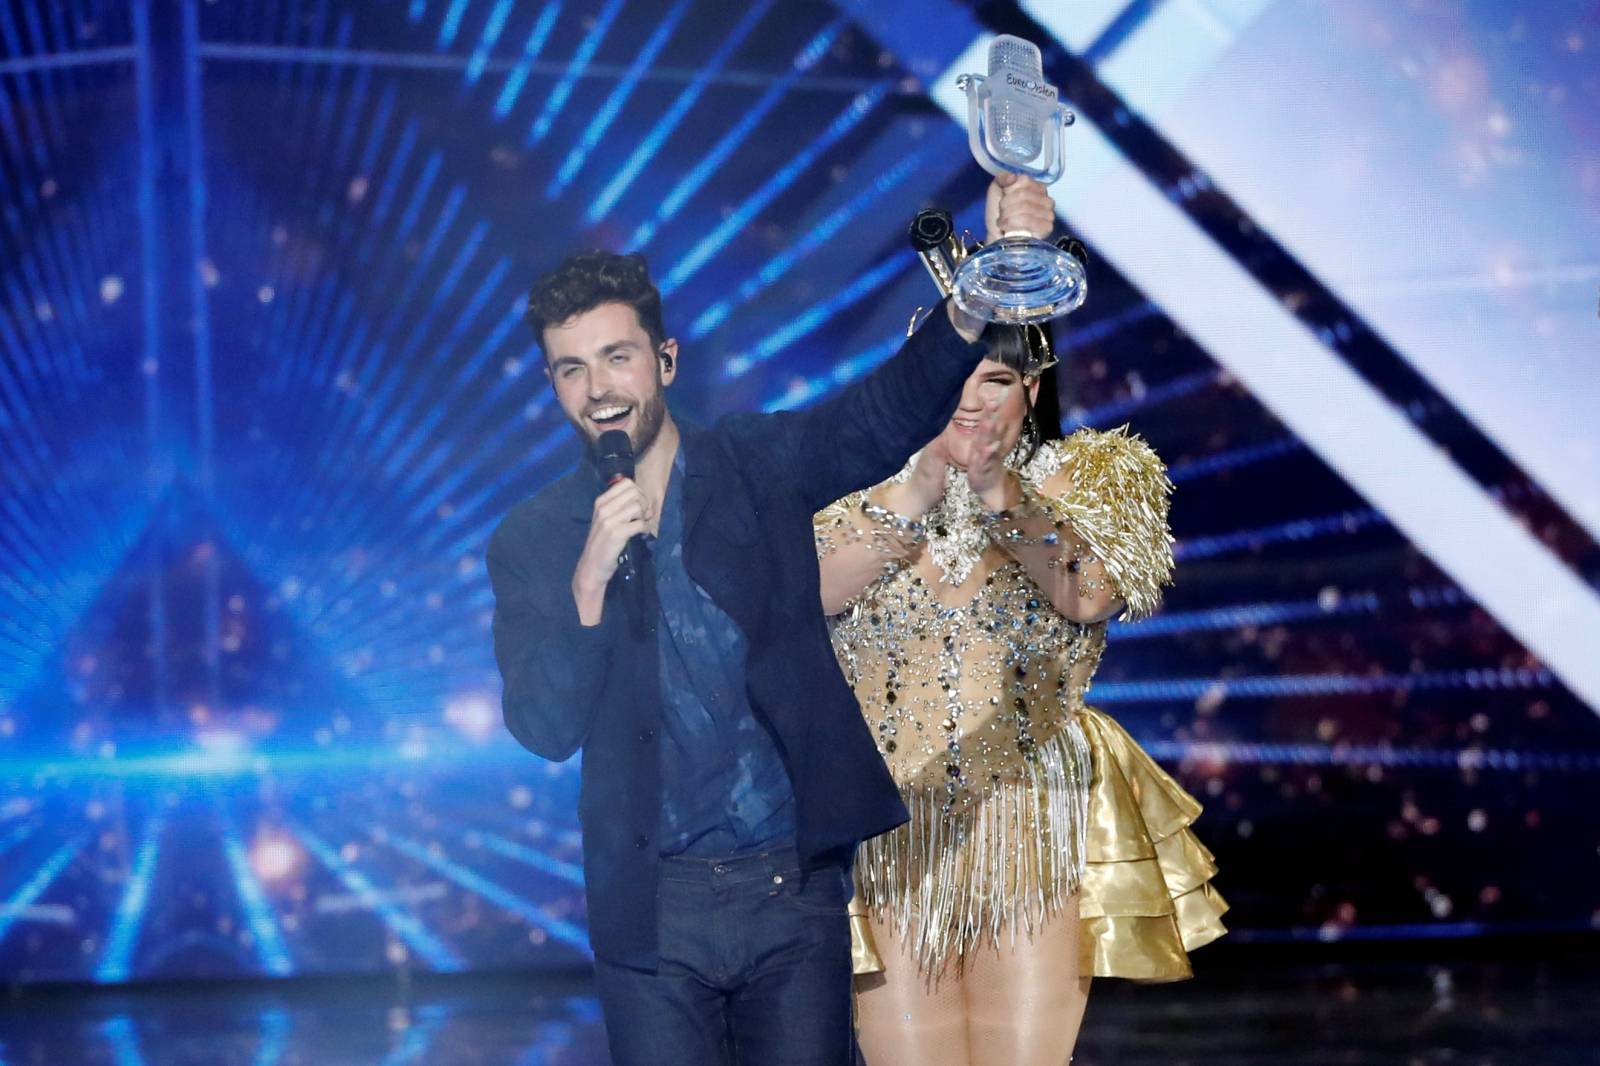 Participant Duncan Laurence of the Netherlands reacts after winning the 2019 Eurovision Song Contest in Tel Aviv, Israel